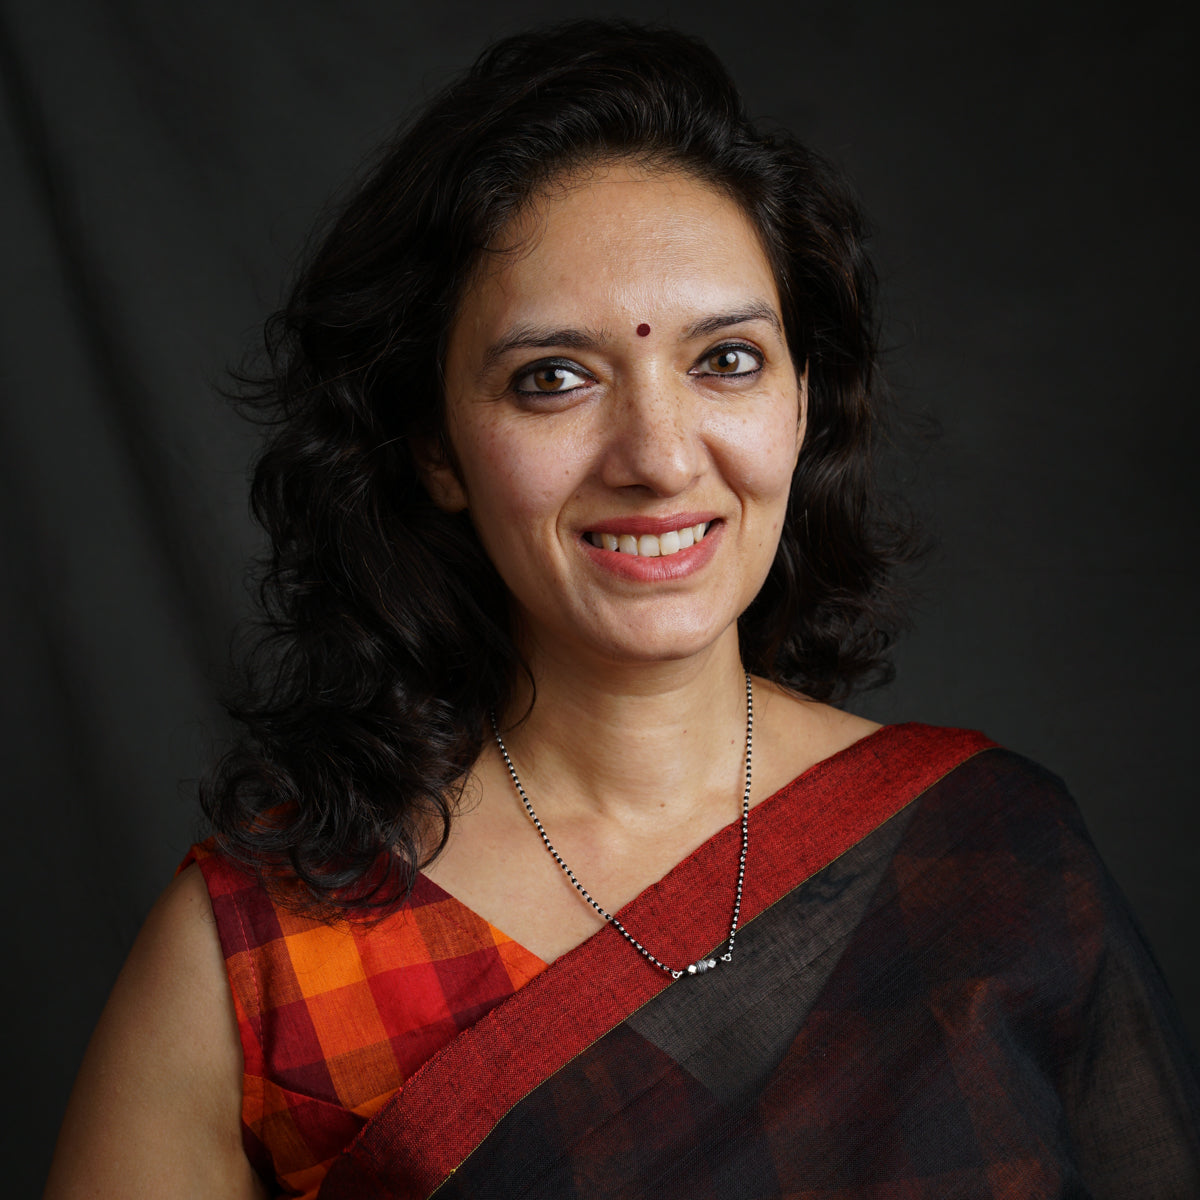 a woman in a red and black sari